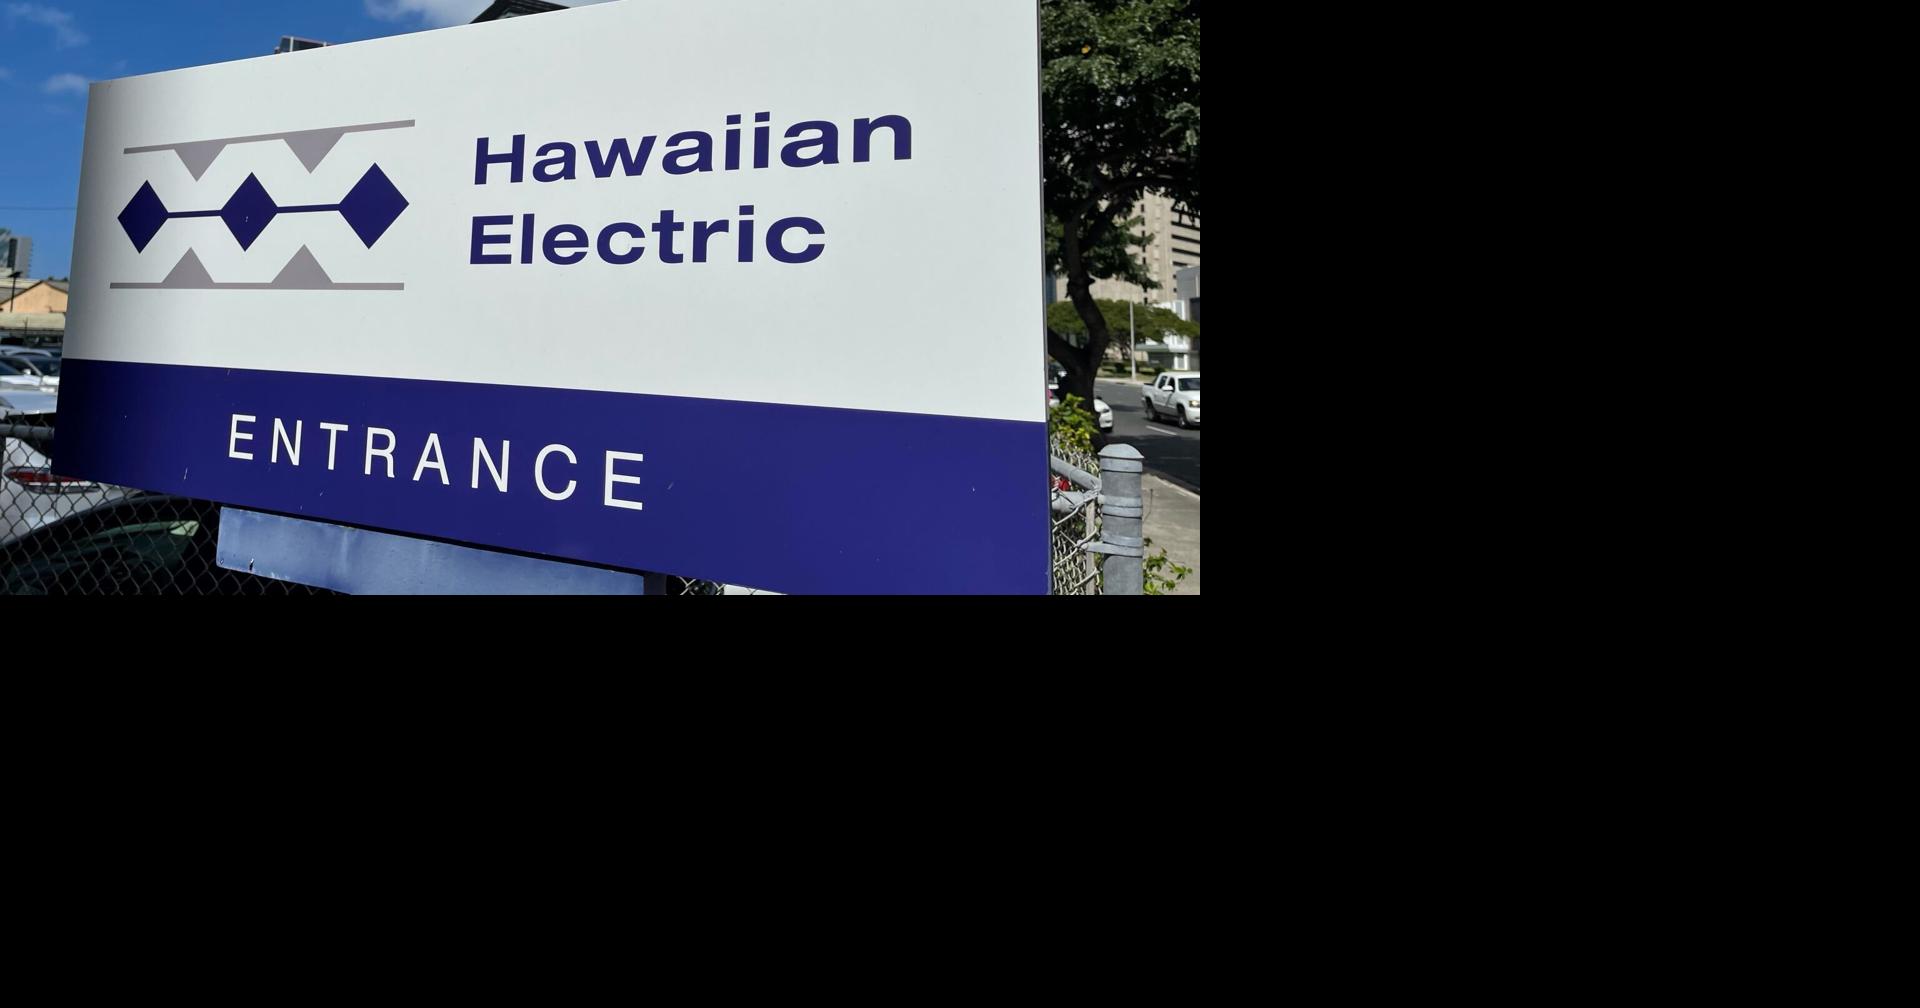 Burning debate on whether Hawaii can go to 100% renewable energy by 2045